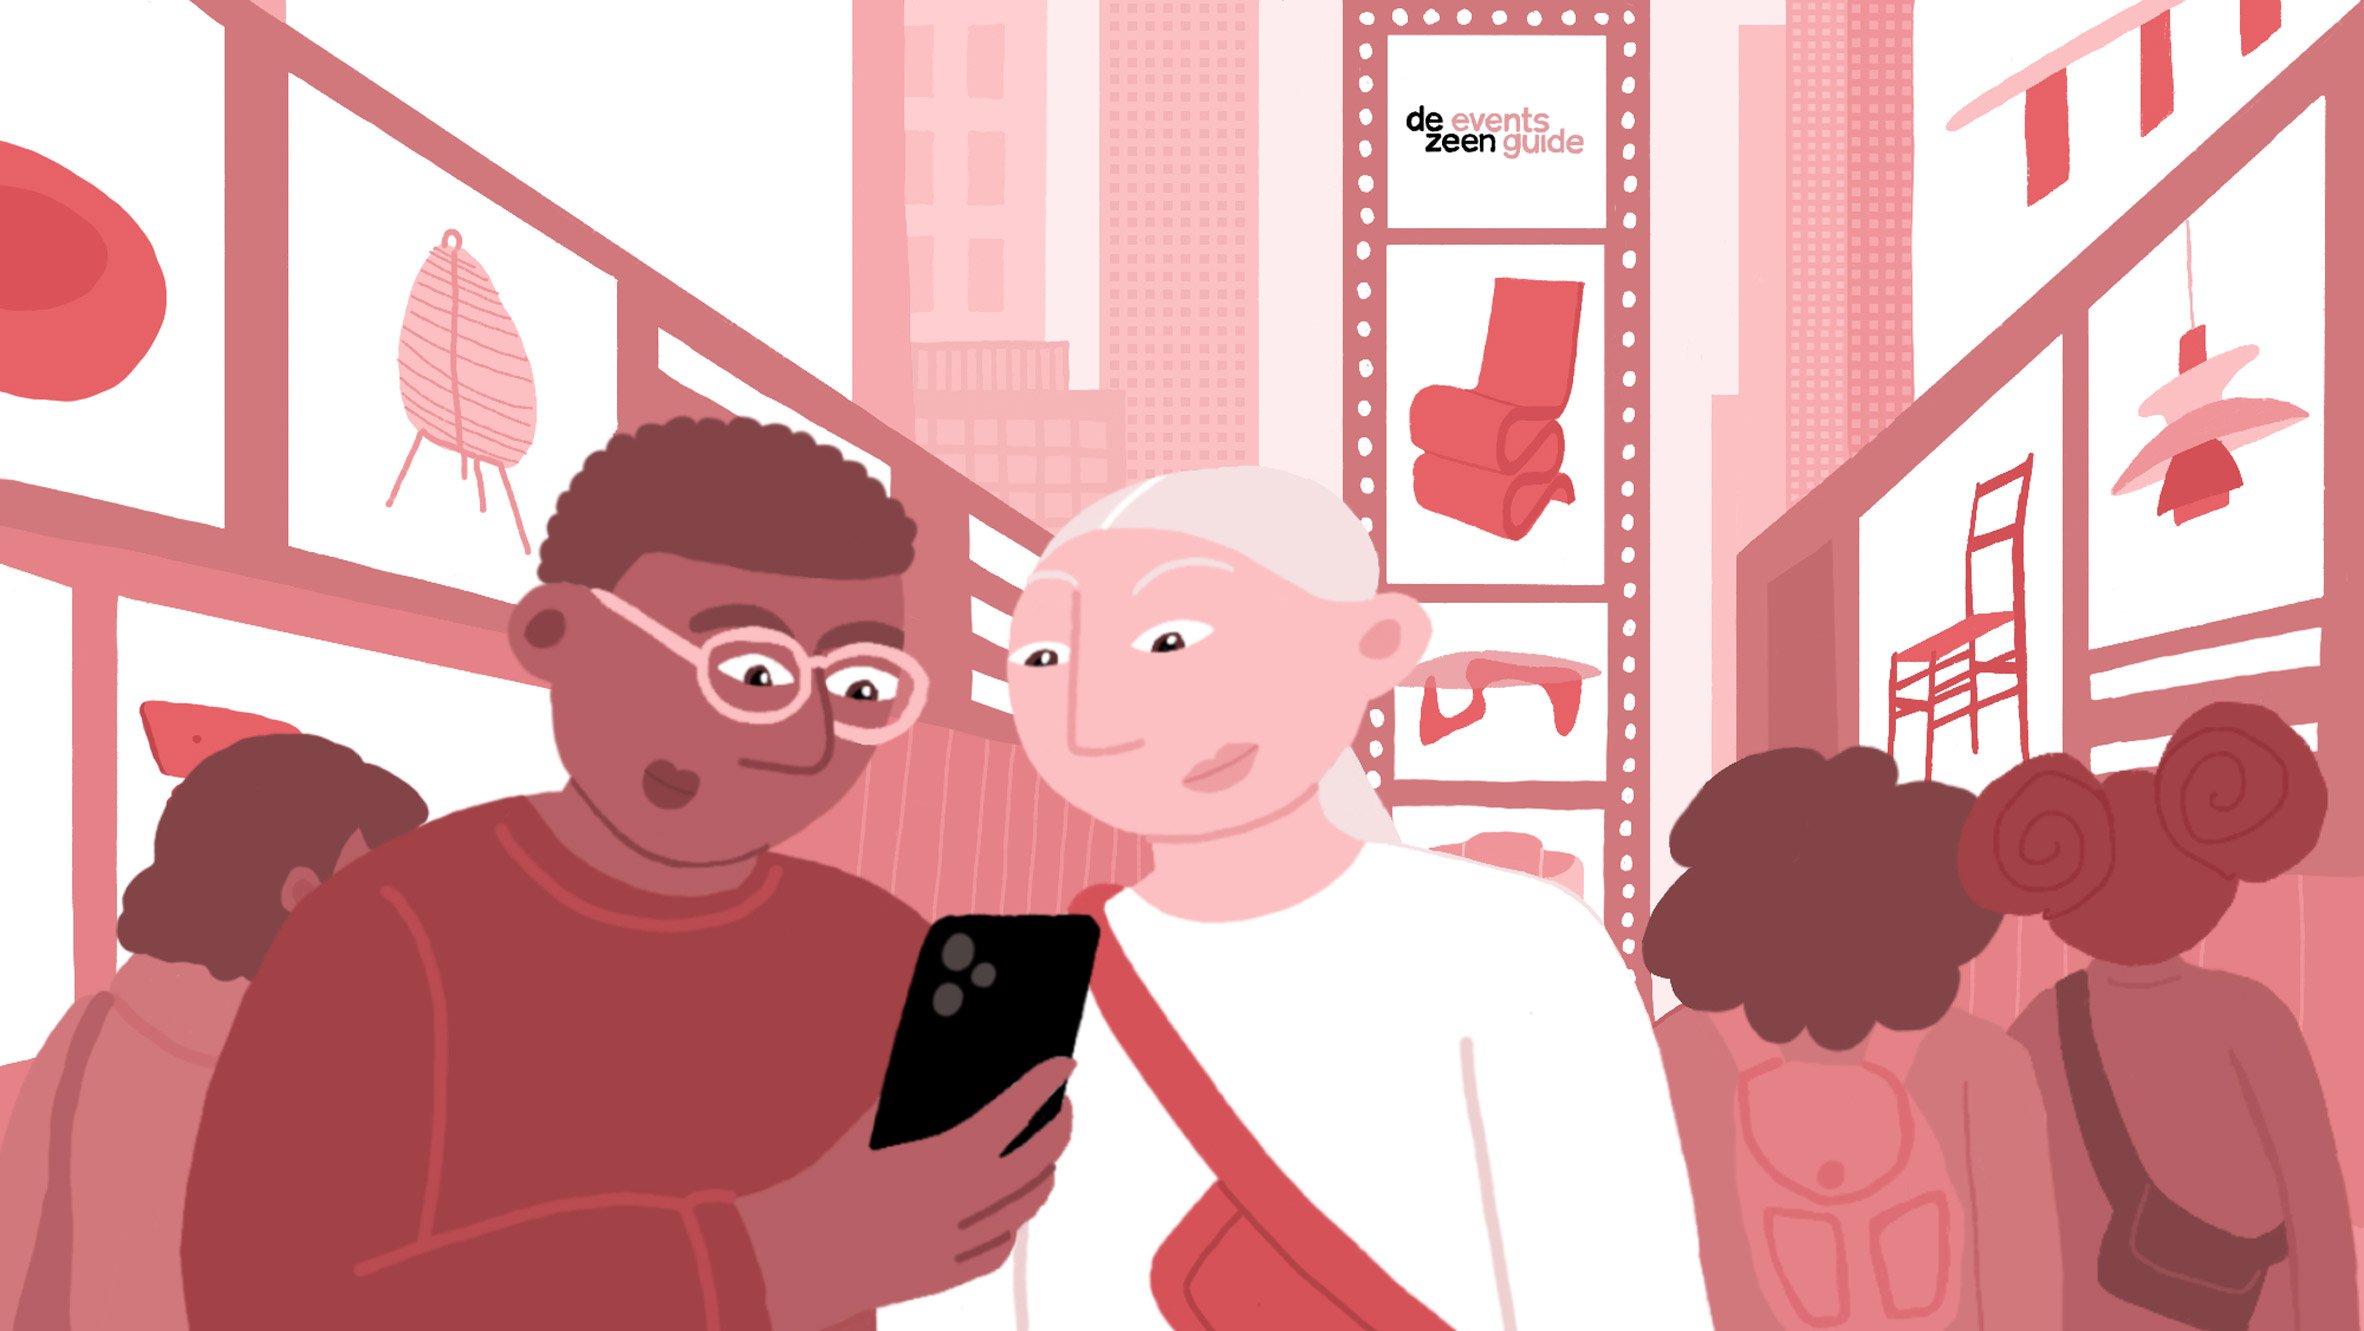 Illustration of people looking at a phone in New York